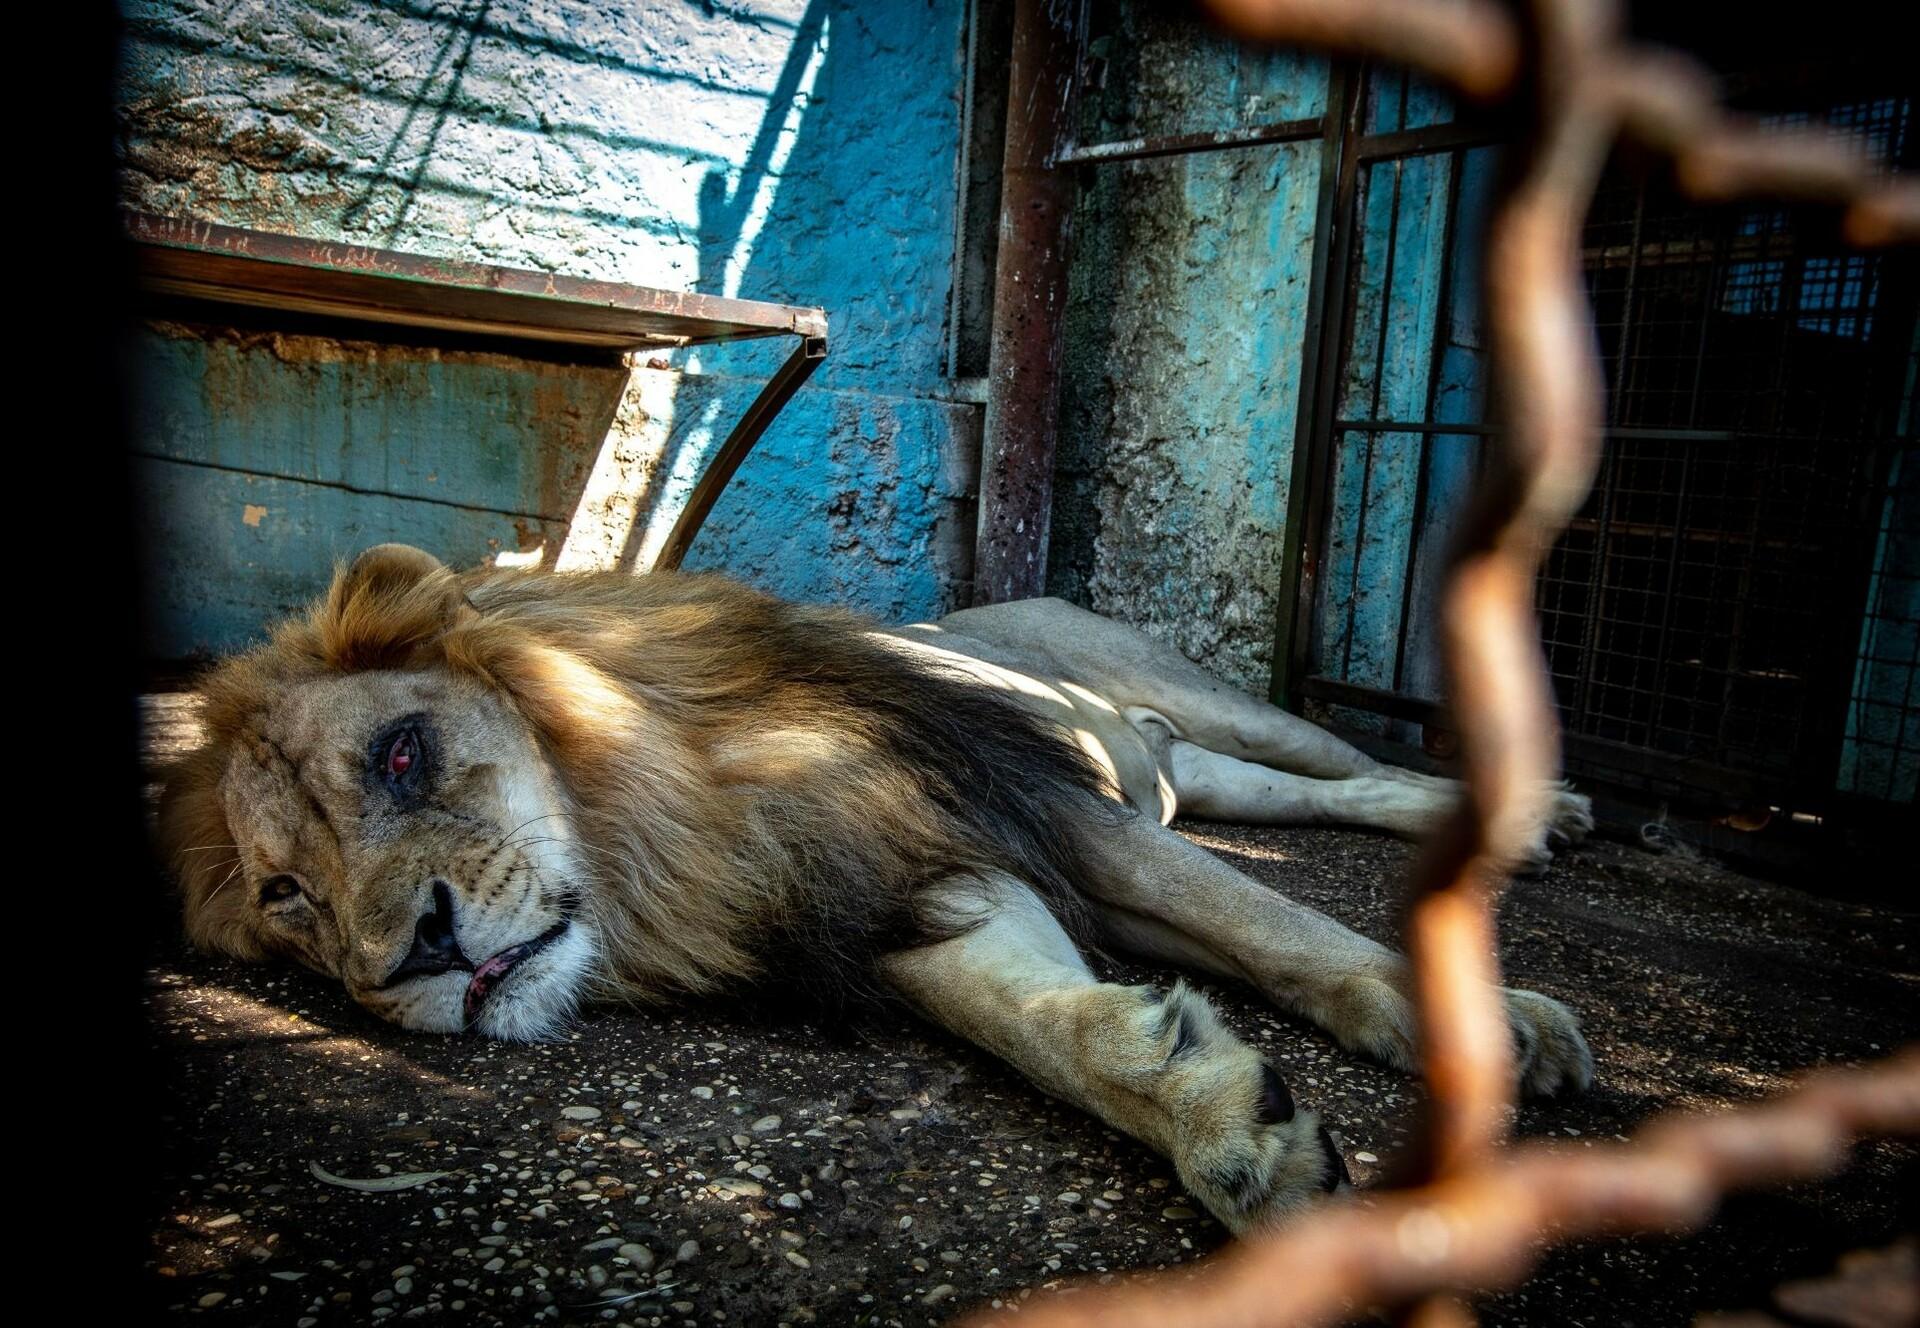 Shutting down Safari Park Zoo in Fier, Albania - FOUR PAWS in South Africa